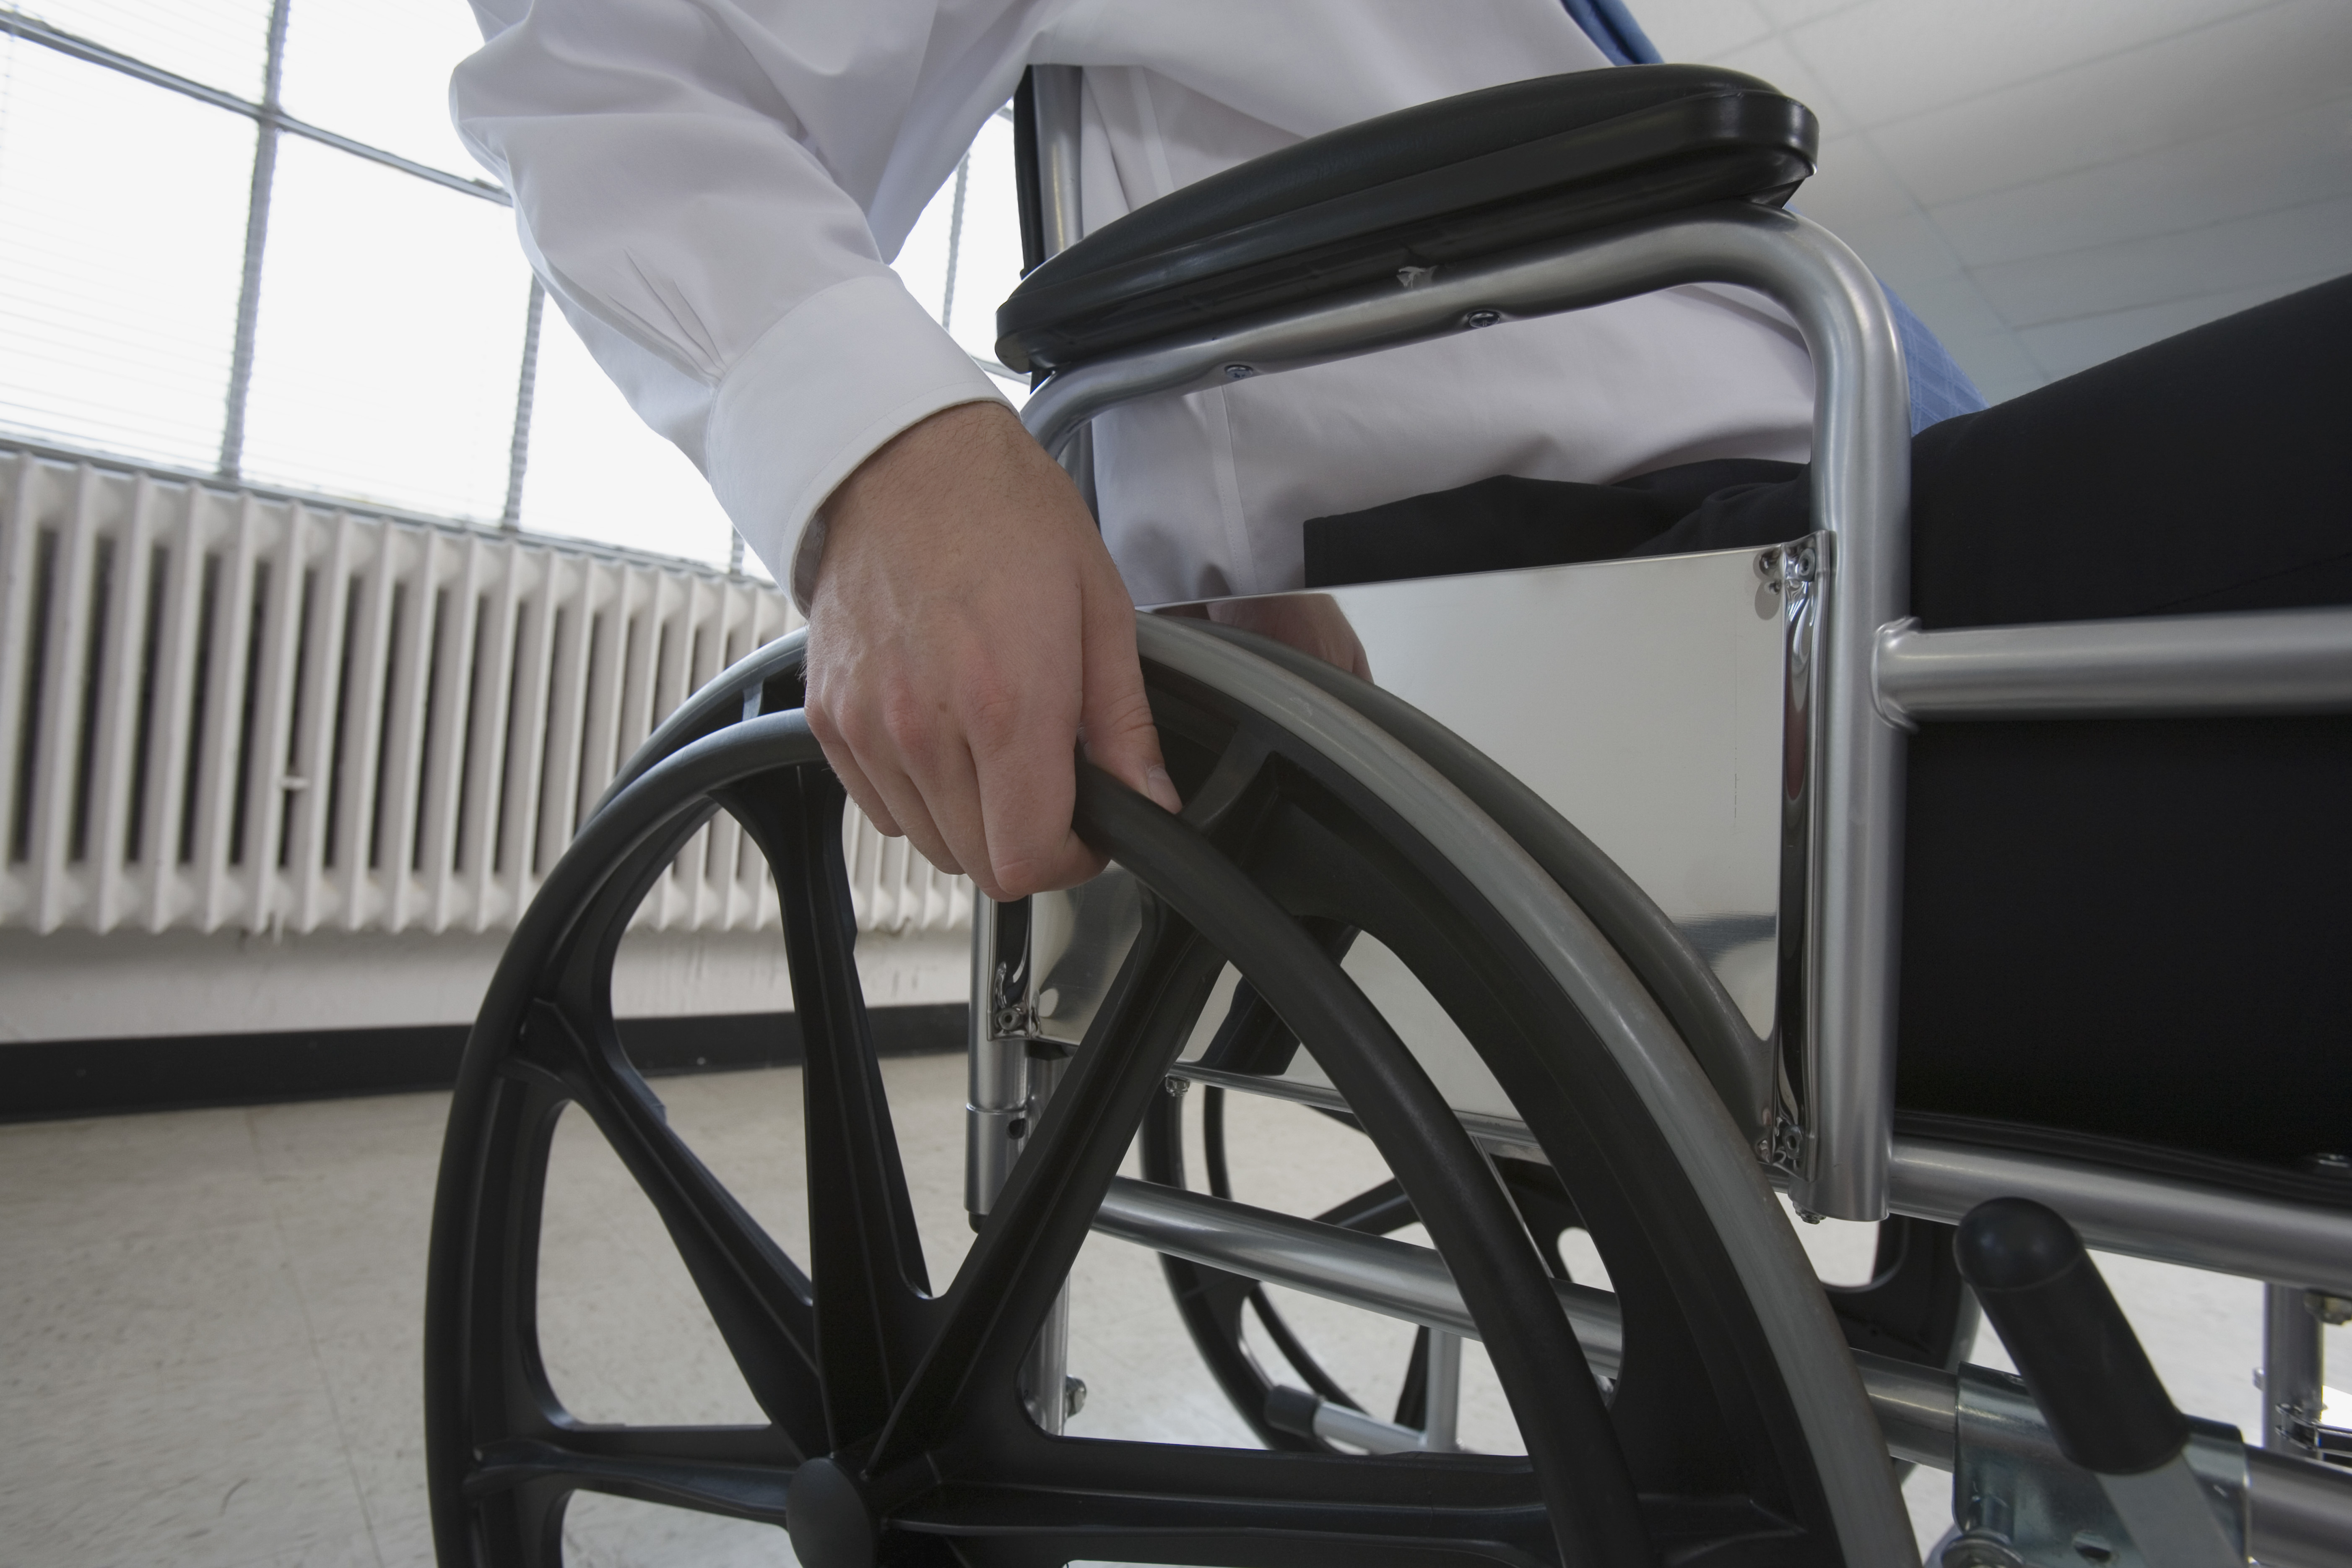 Peterson awarded over $400K to address shoulder pain for wheelchair users .